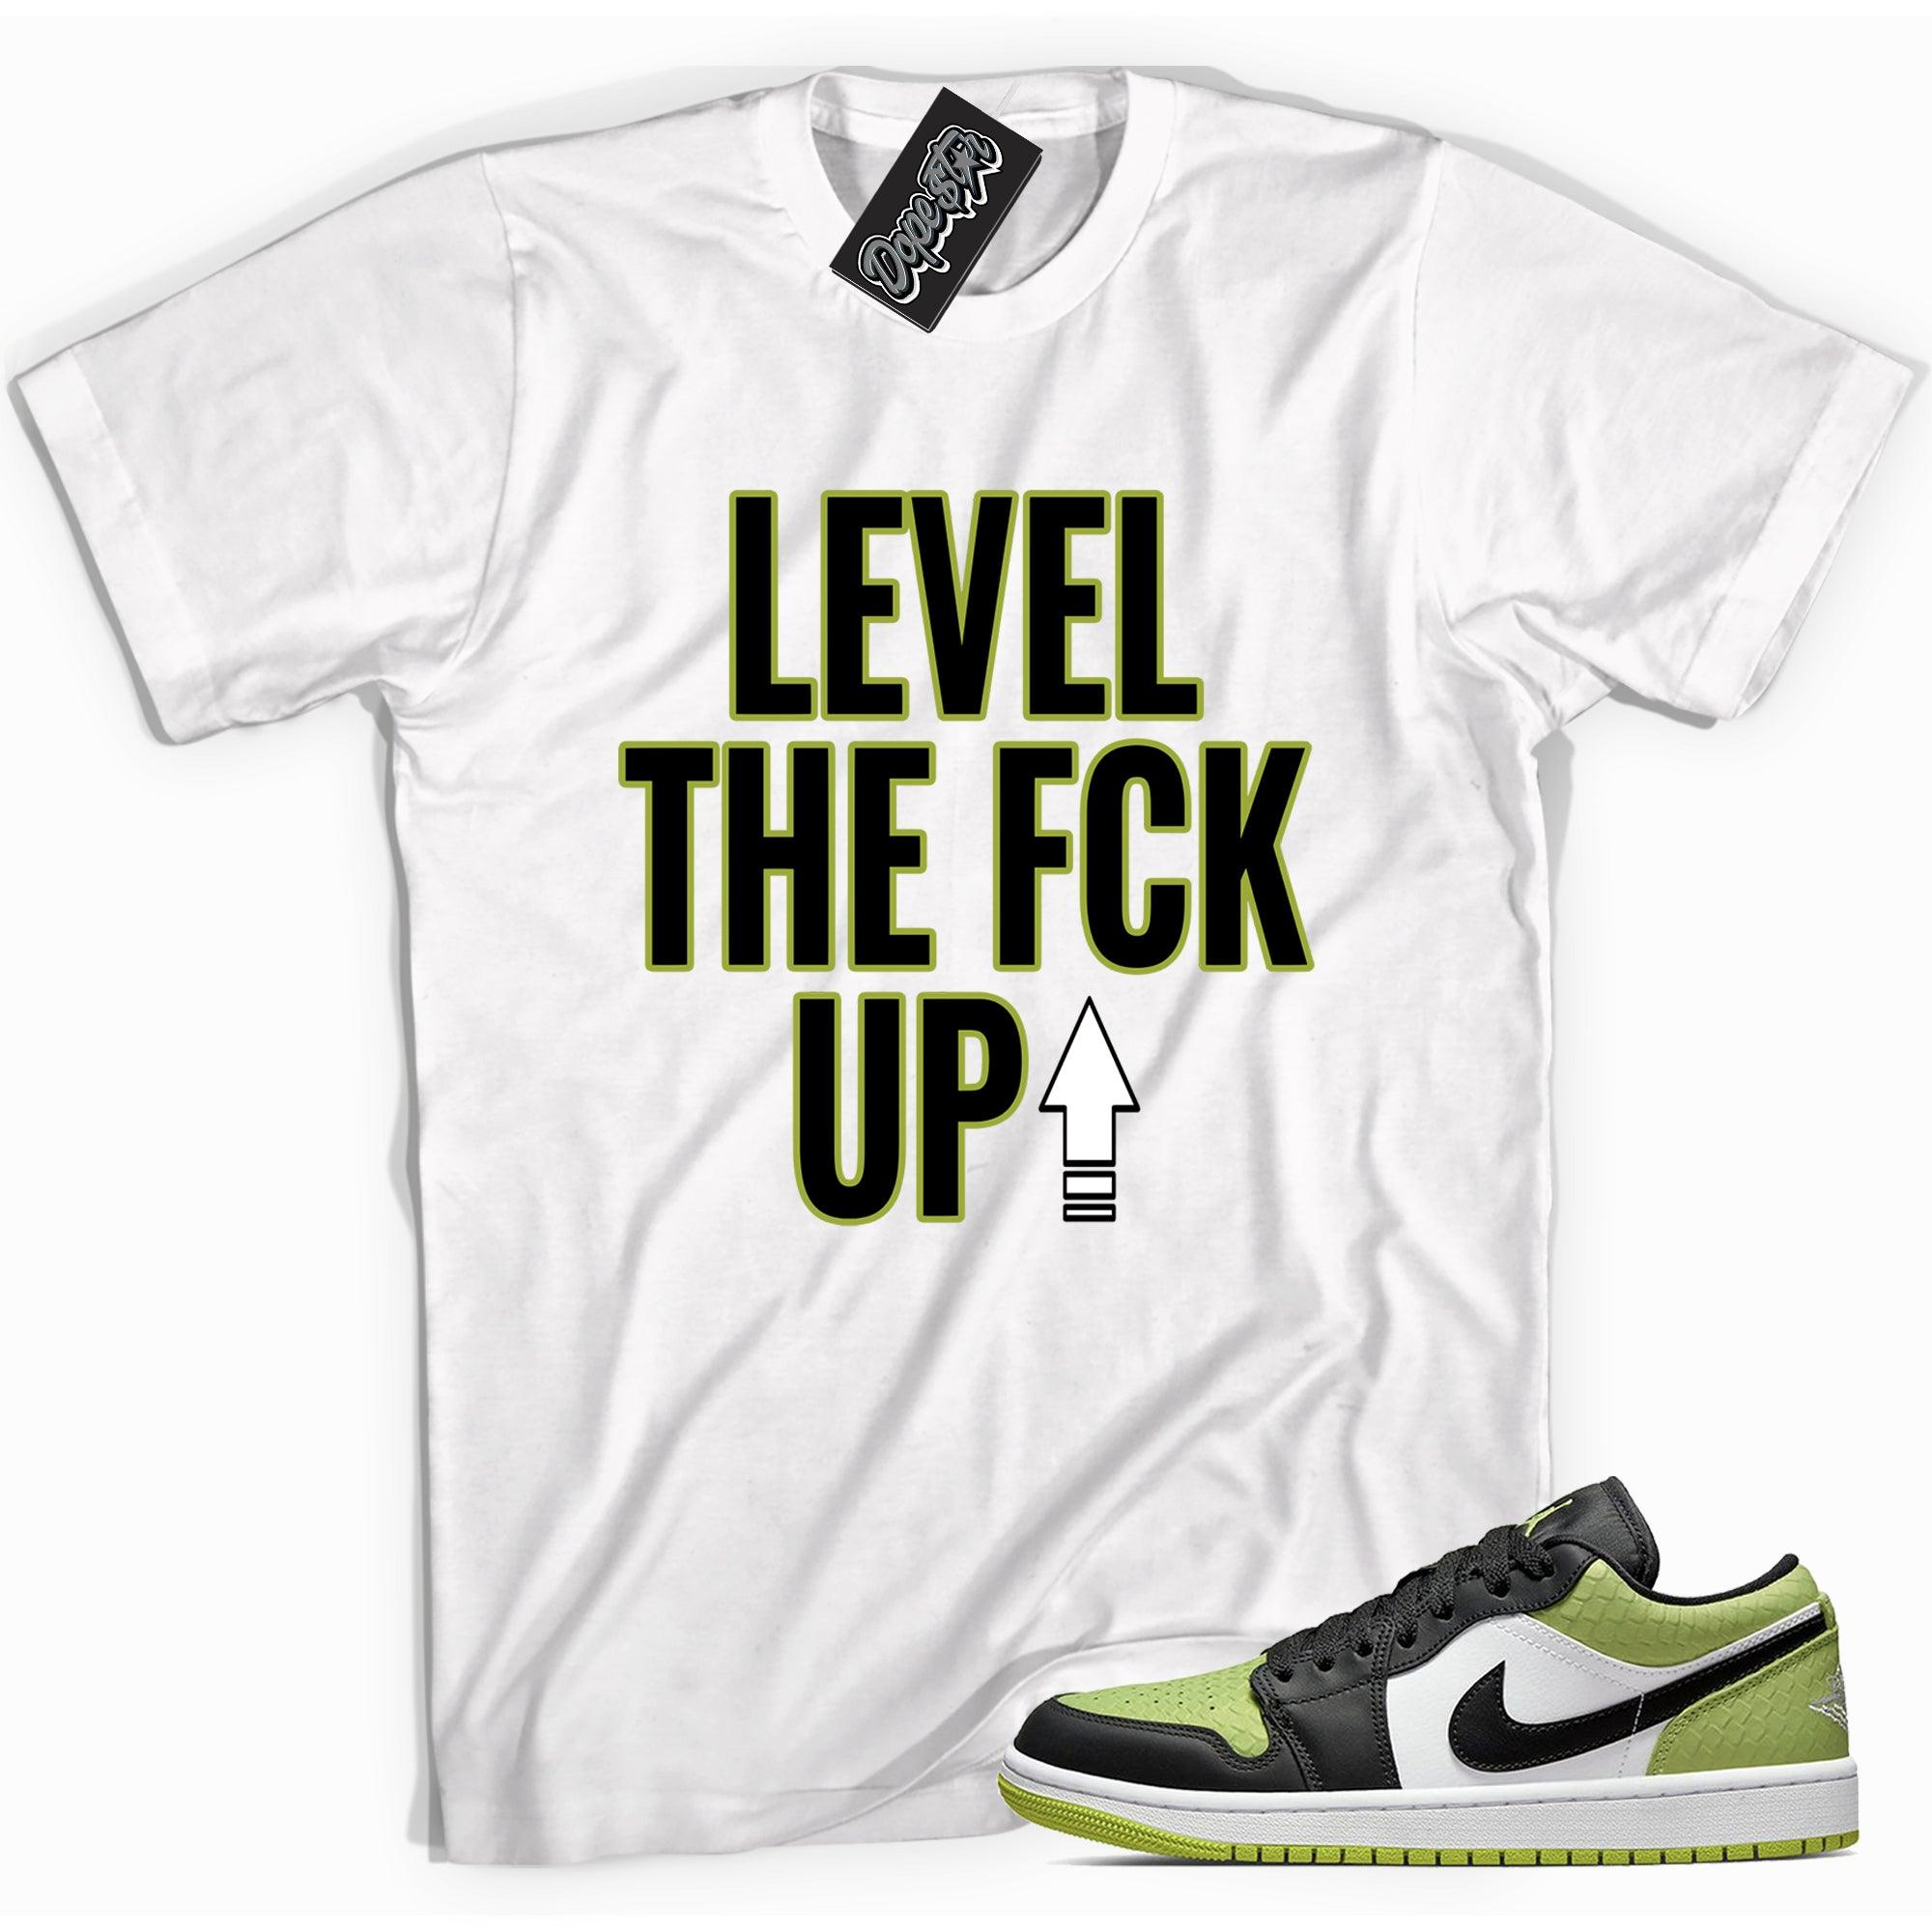 Cool white graphic tee with 'Level Up' print, that perfectly matches Air Jordan 1 Low Snakeskin Vivid Green sneakers.